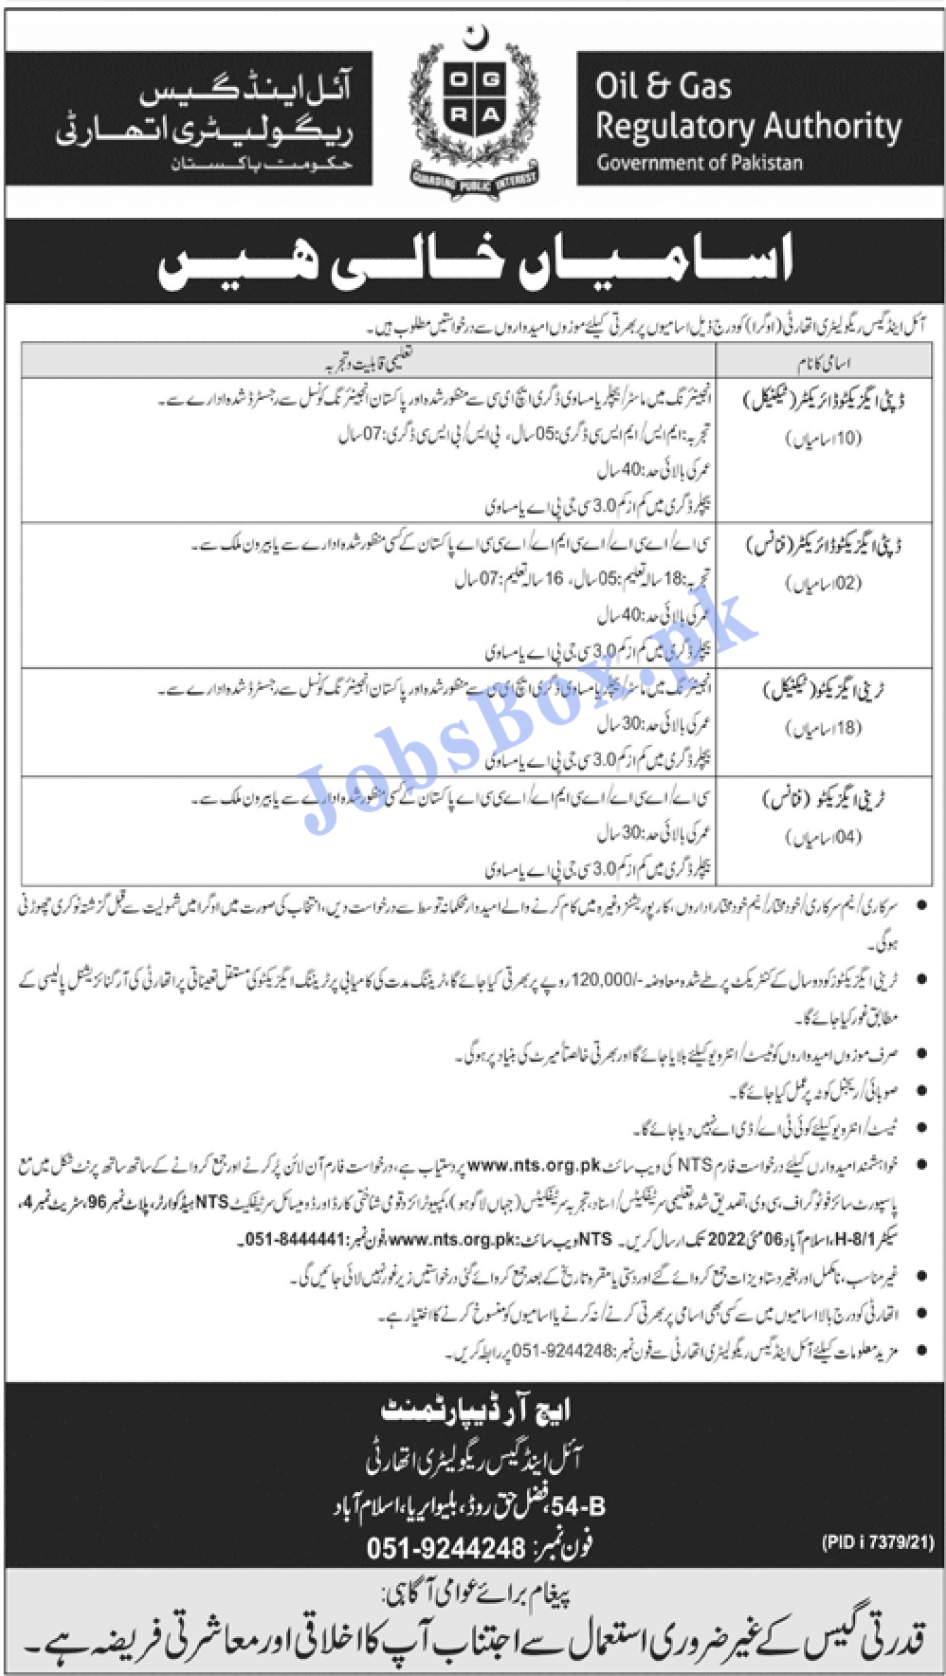 Oil and Gas Regulator Authority OGRA Jobs 2022 Online Form at NTS